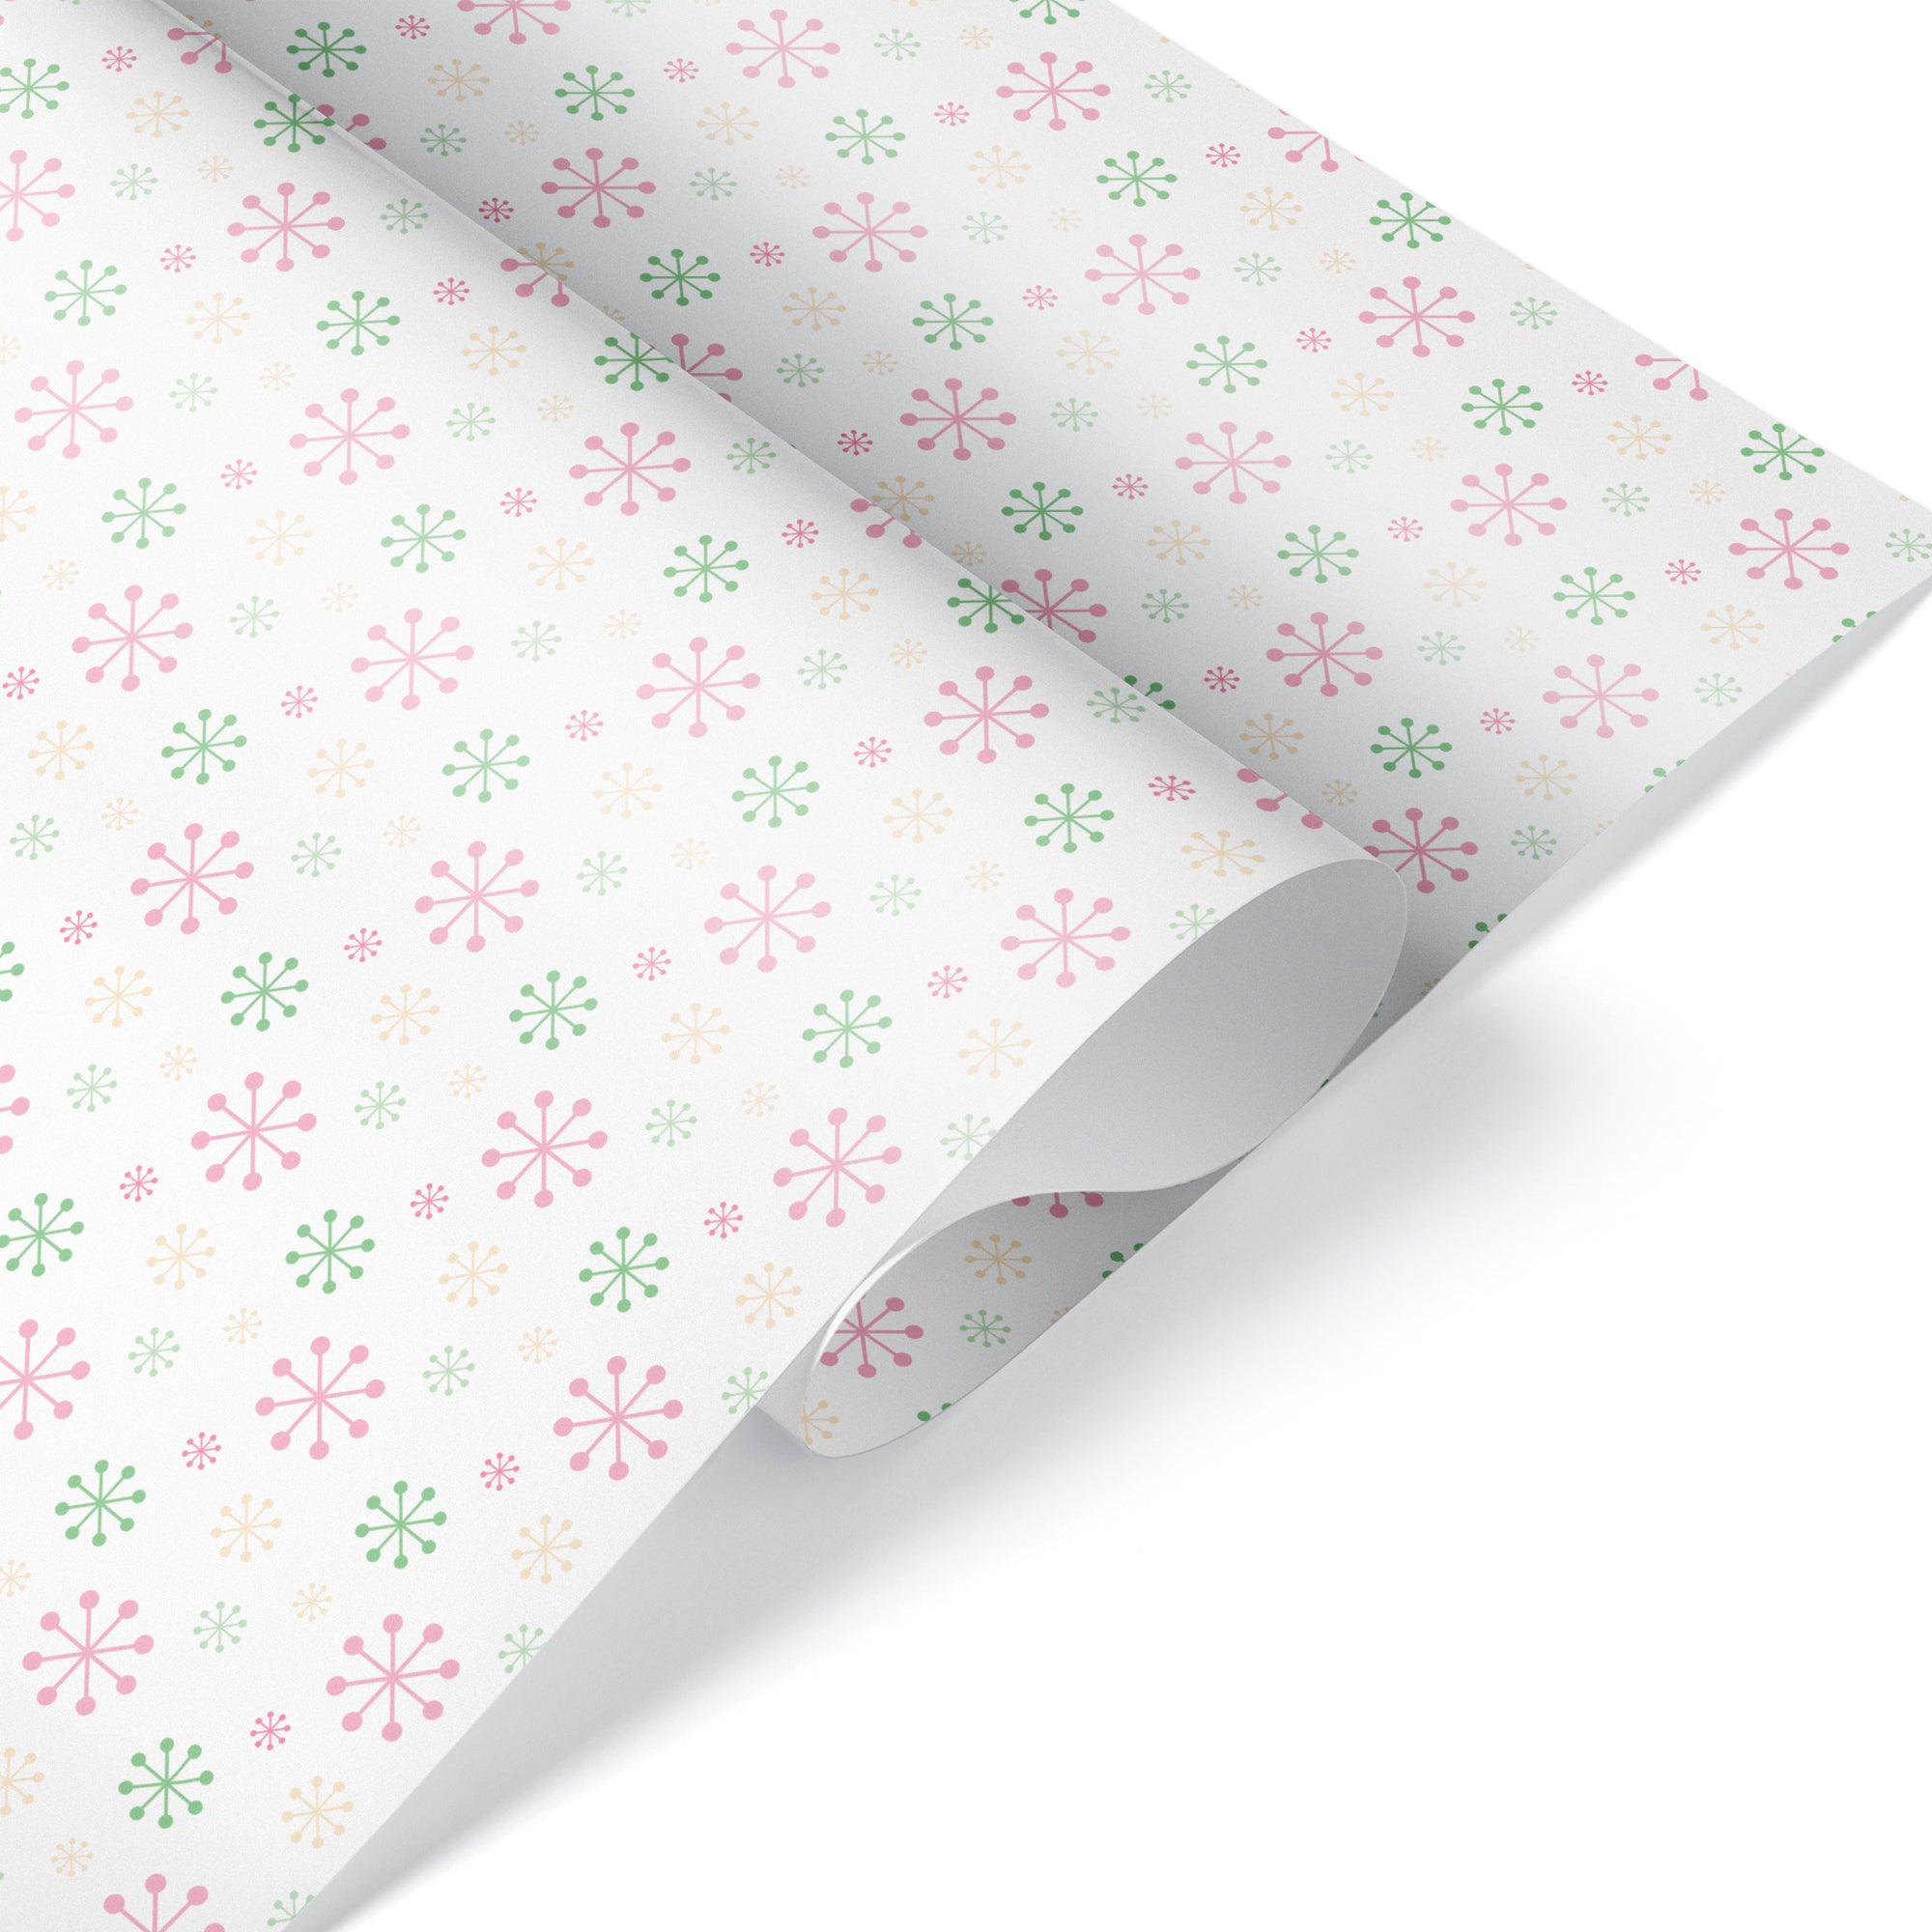 Set of 3 Assorted Pastel Christmas Wrapping Papers, Variety Pack Pink -  Graphic Spaces